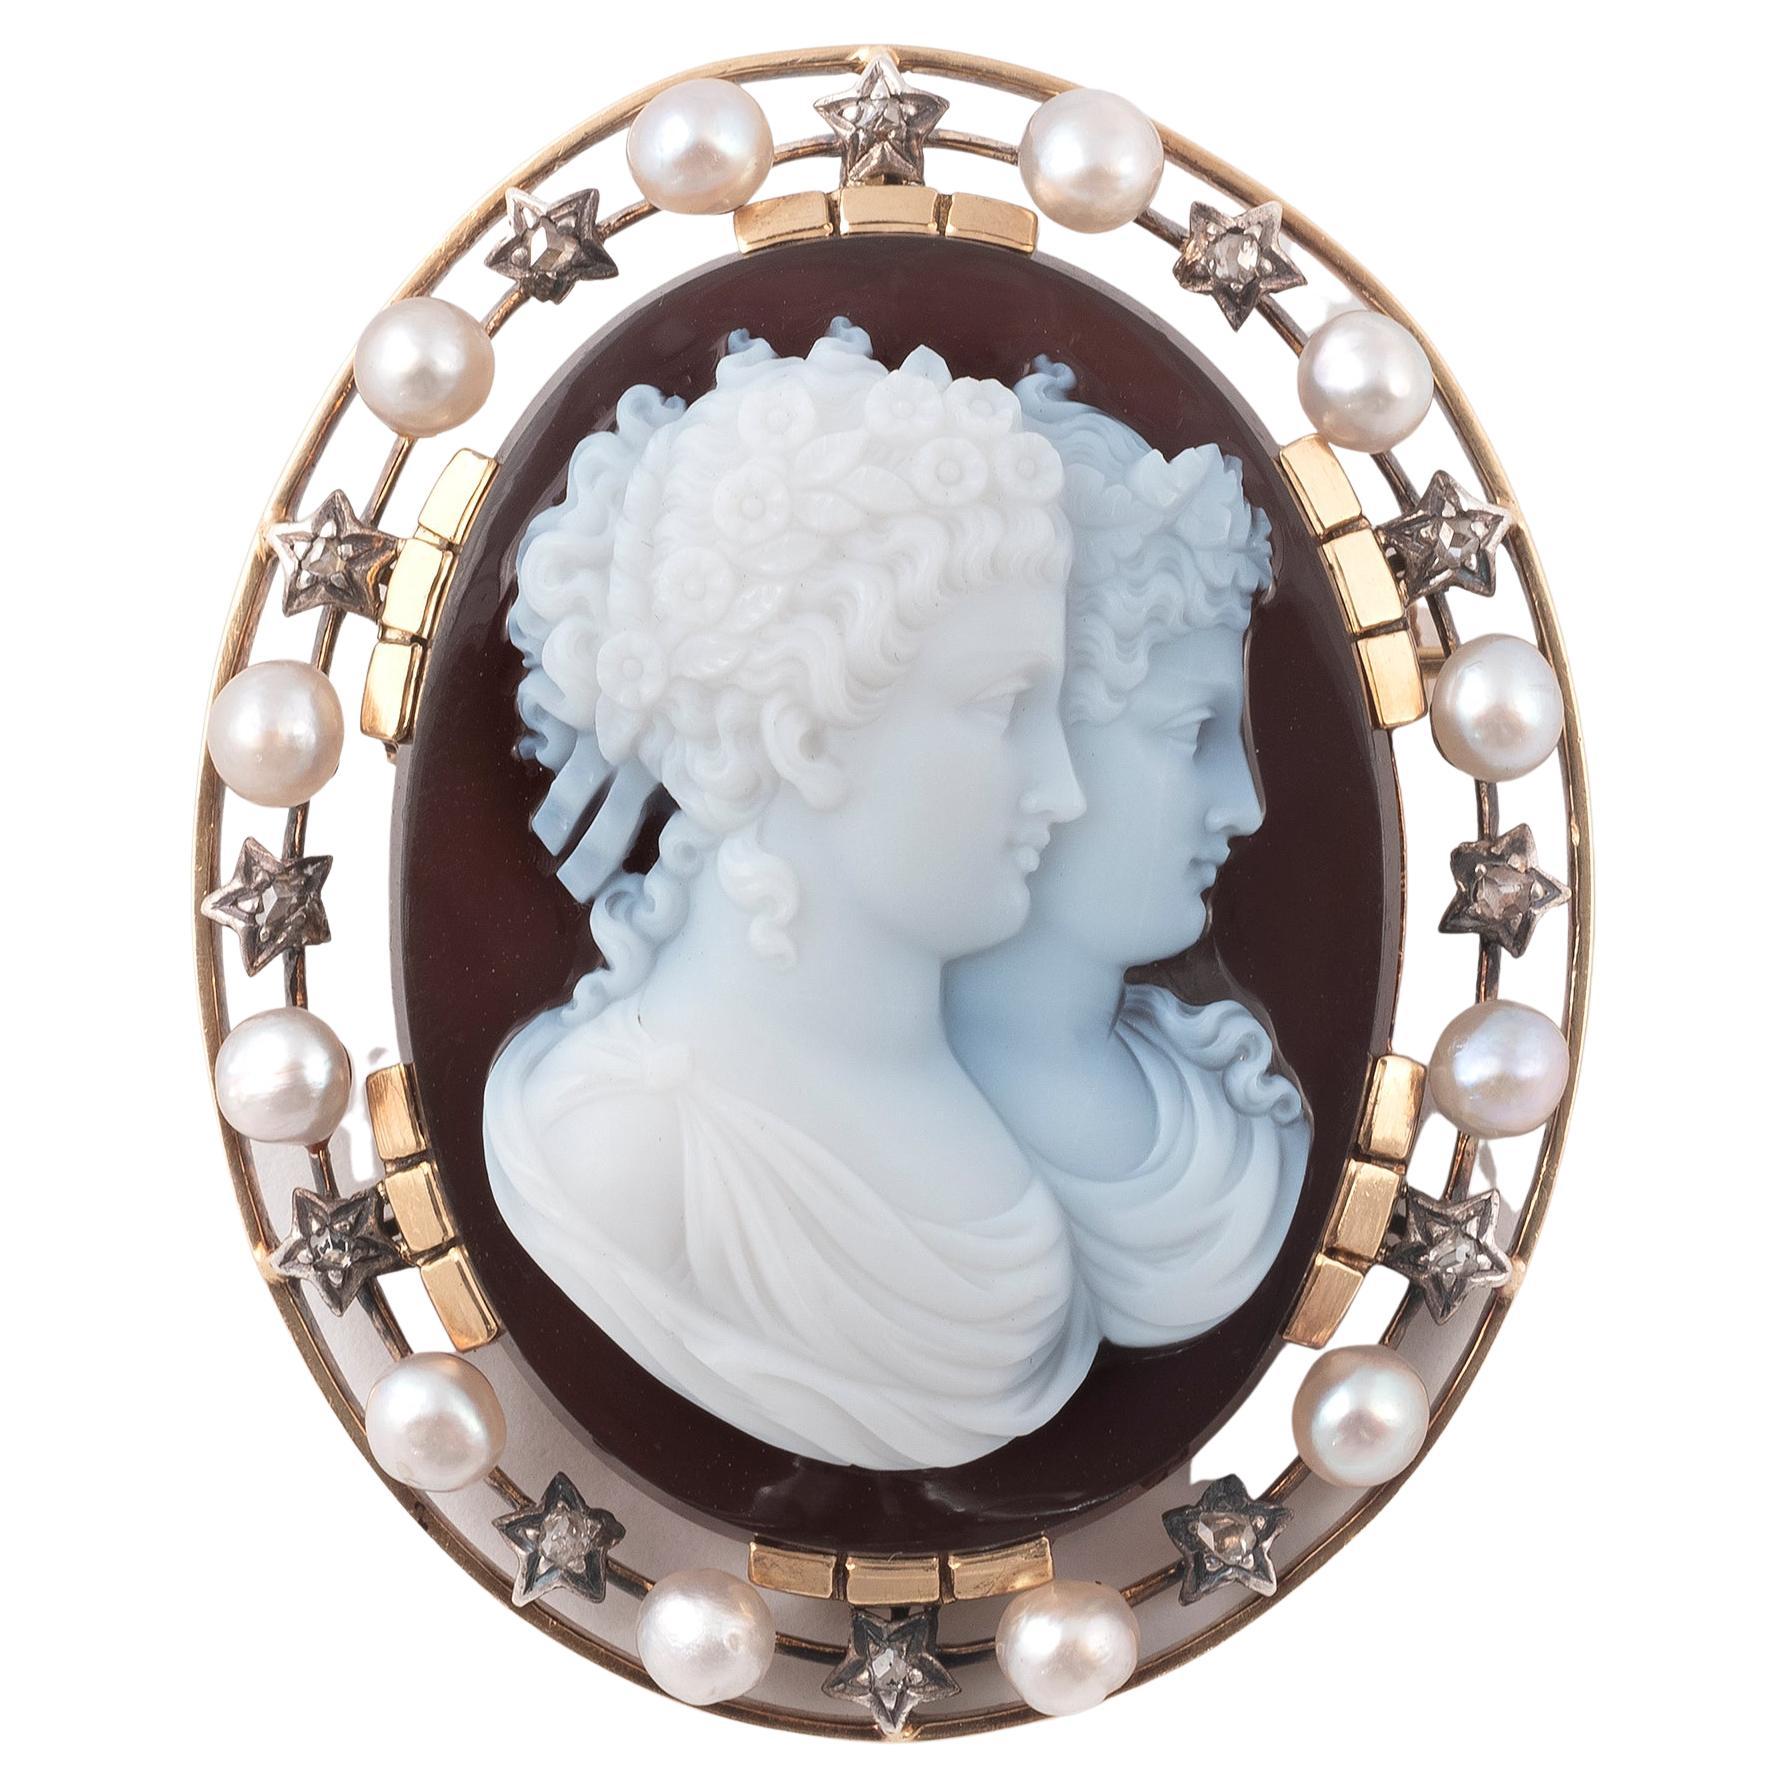 The oval onyx cameo, carved to depict the double portrait in profile, within rose diamond and pearl border, mounted in silver and gold
Length 6cm